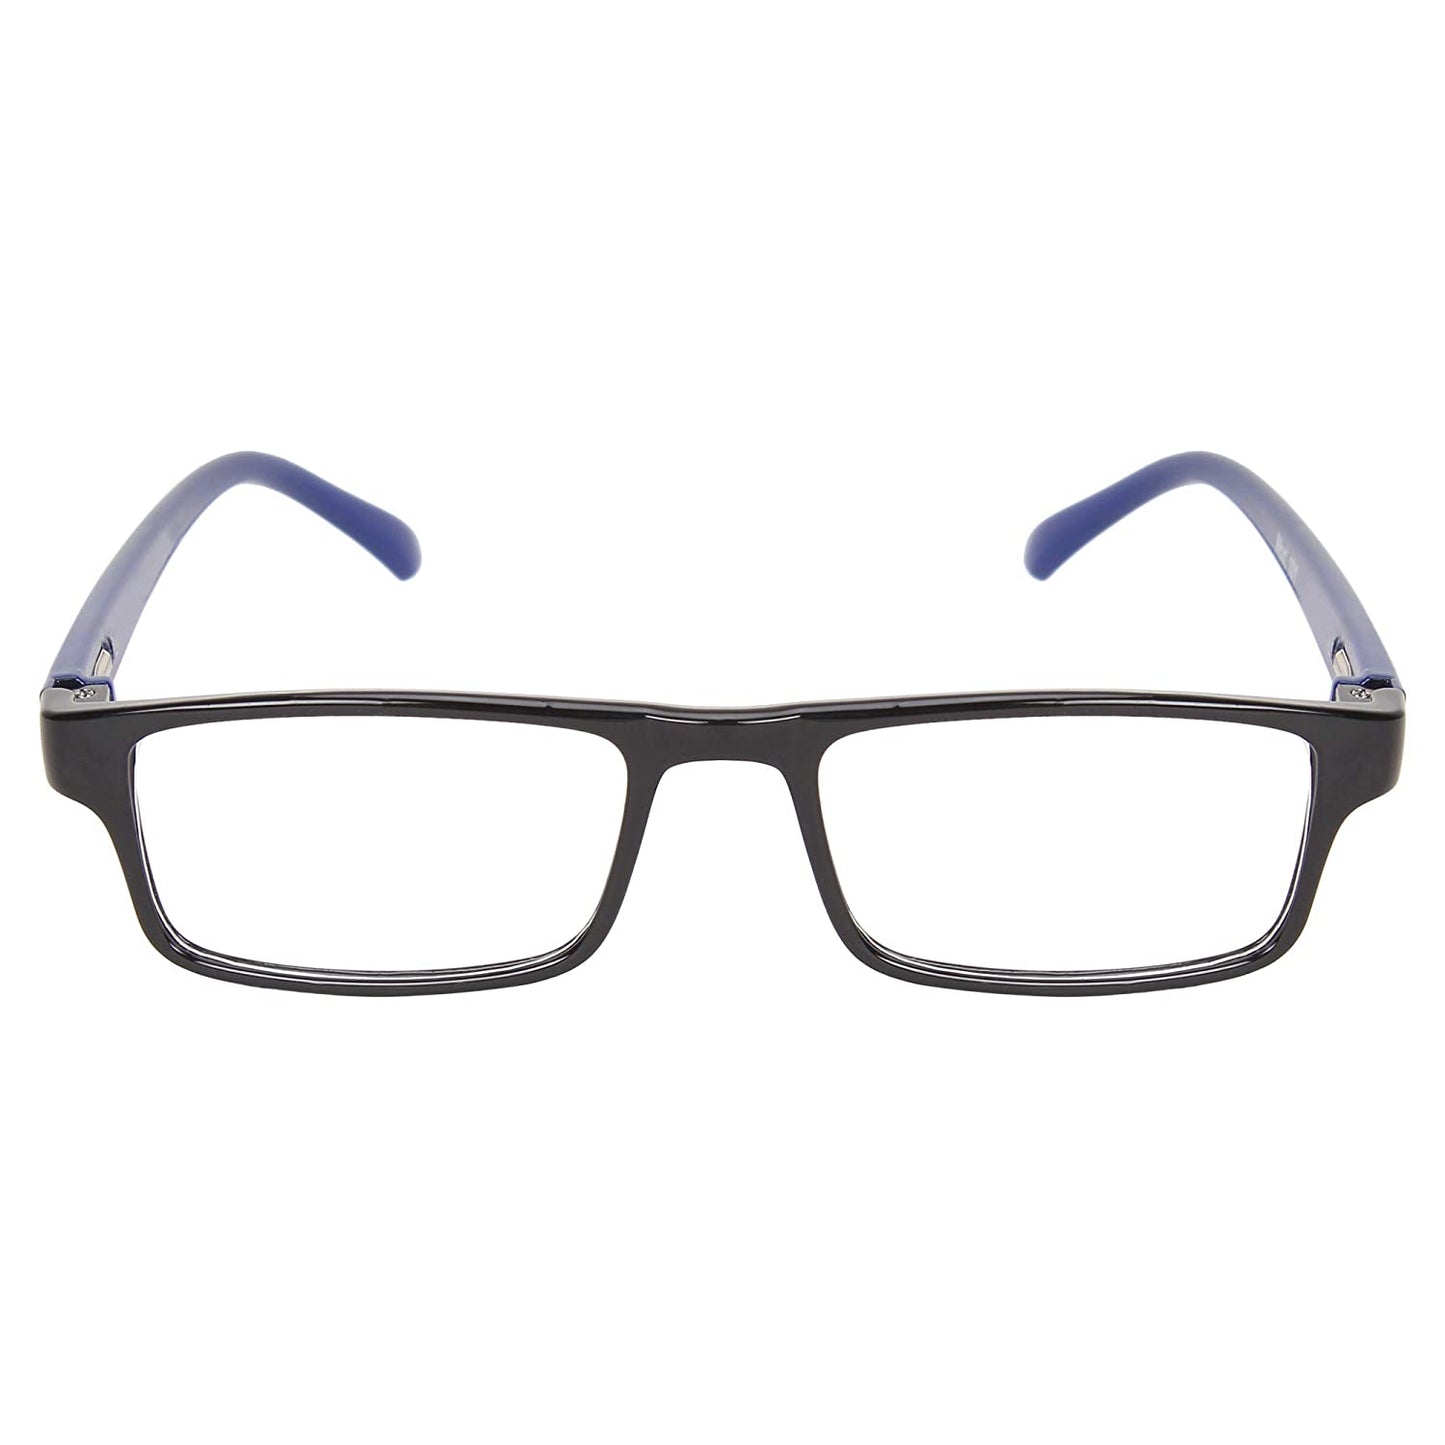 Black Blue Computer Glasses Spectacle Frame for Teens with Anti Glare Lens